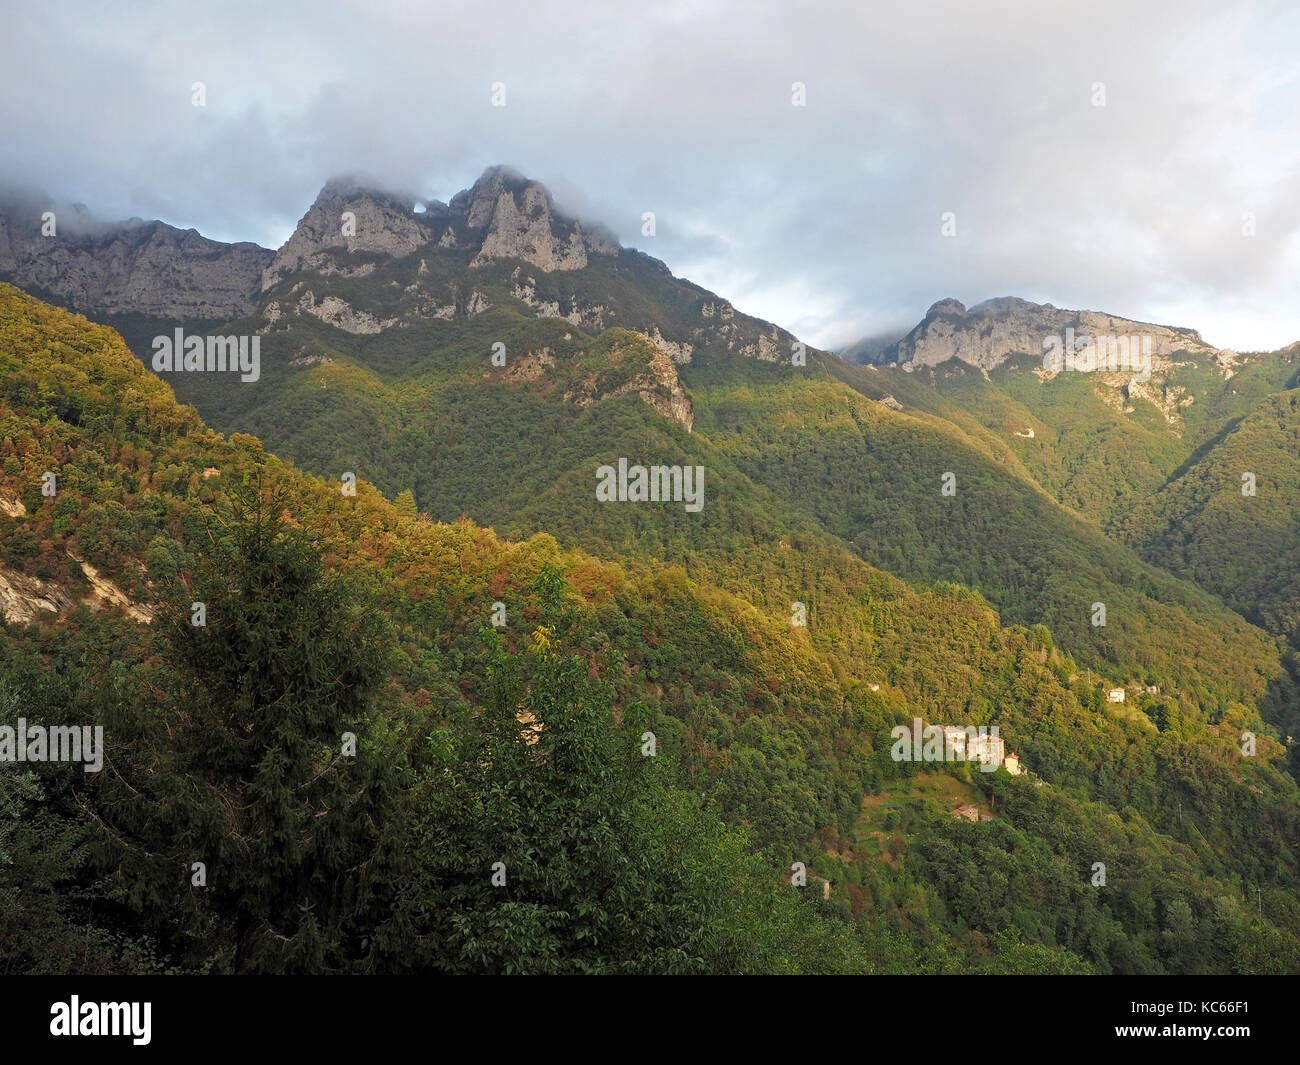 View of wooded slopes beneath Monte Forato in the Apuan Alps in Tuscany, Italy Stock Photo